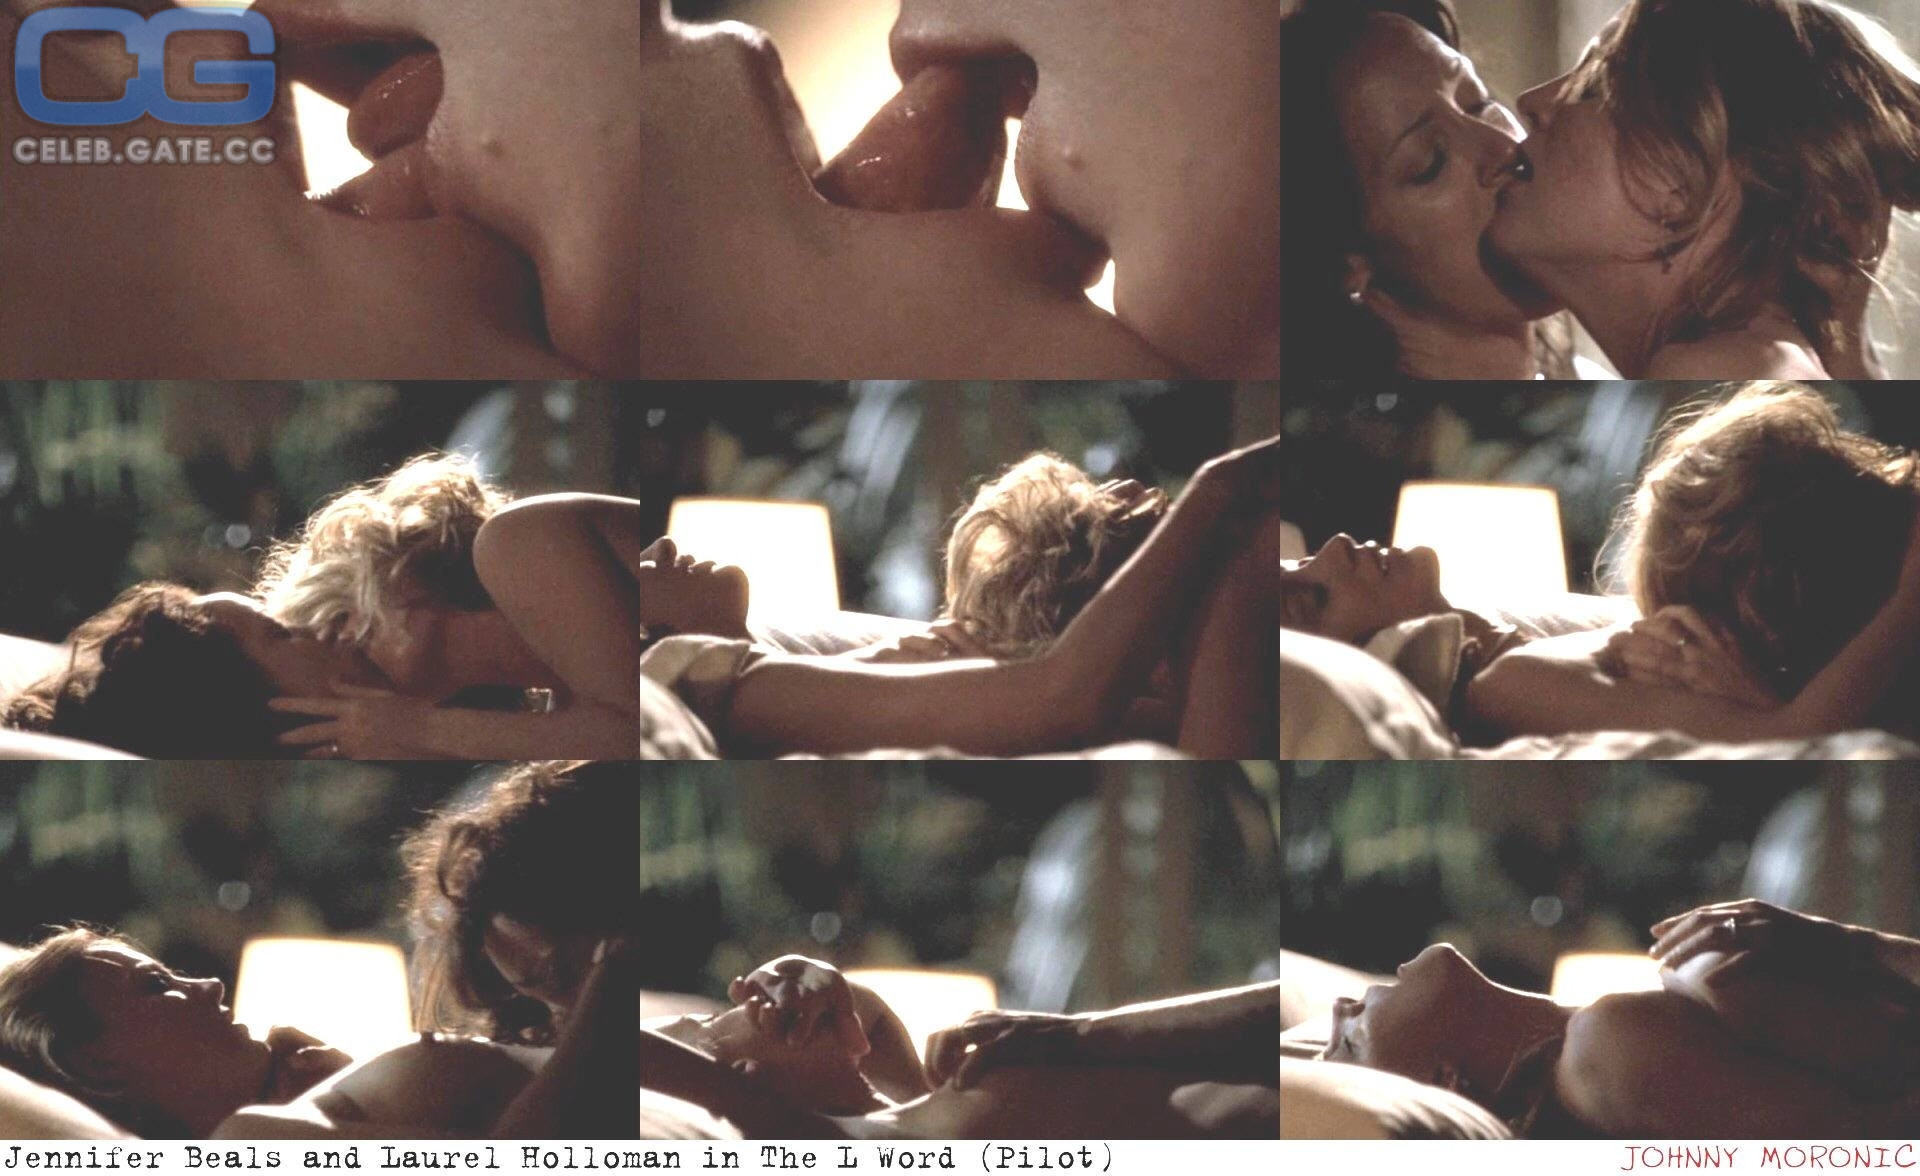 JENNIFER BEALS nude - 78 and 24 videos - including scenes from "Nothin...